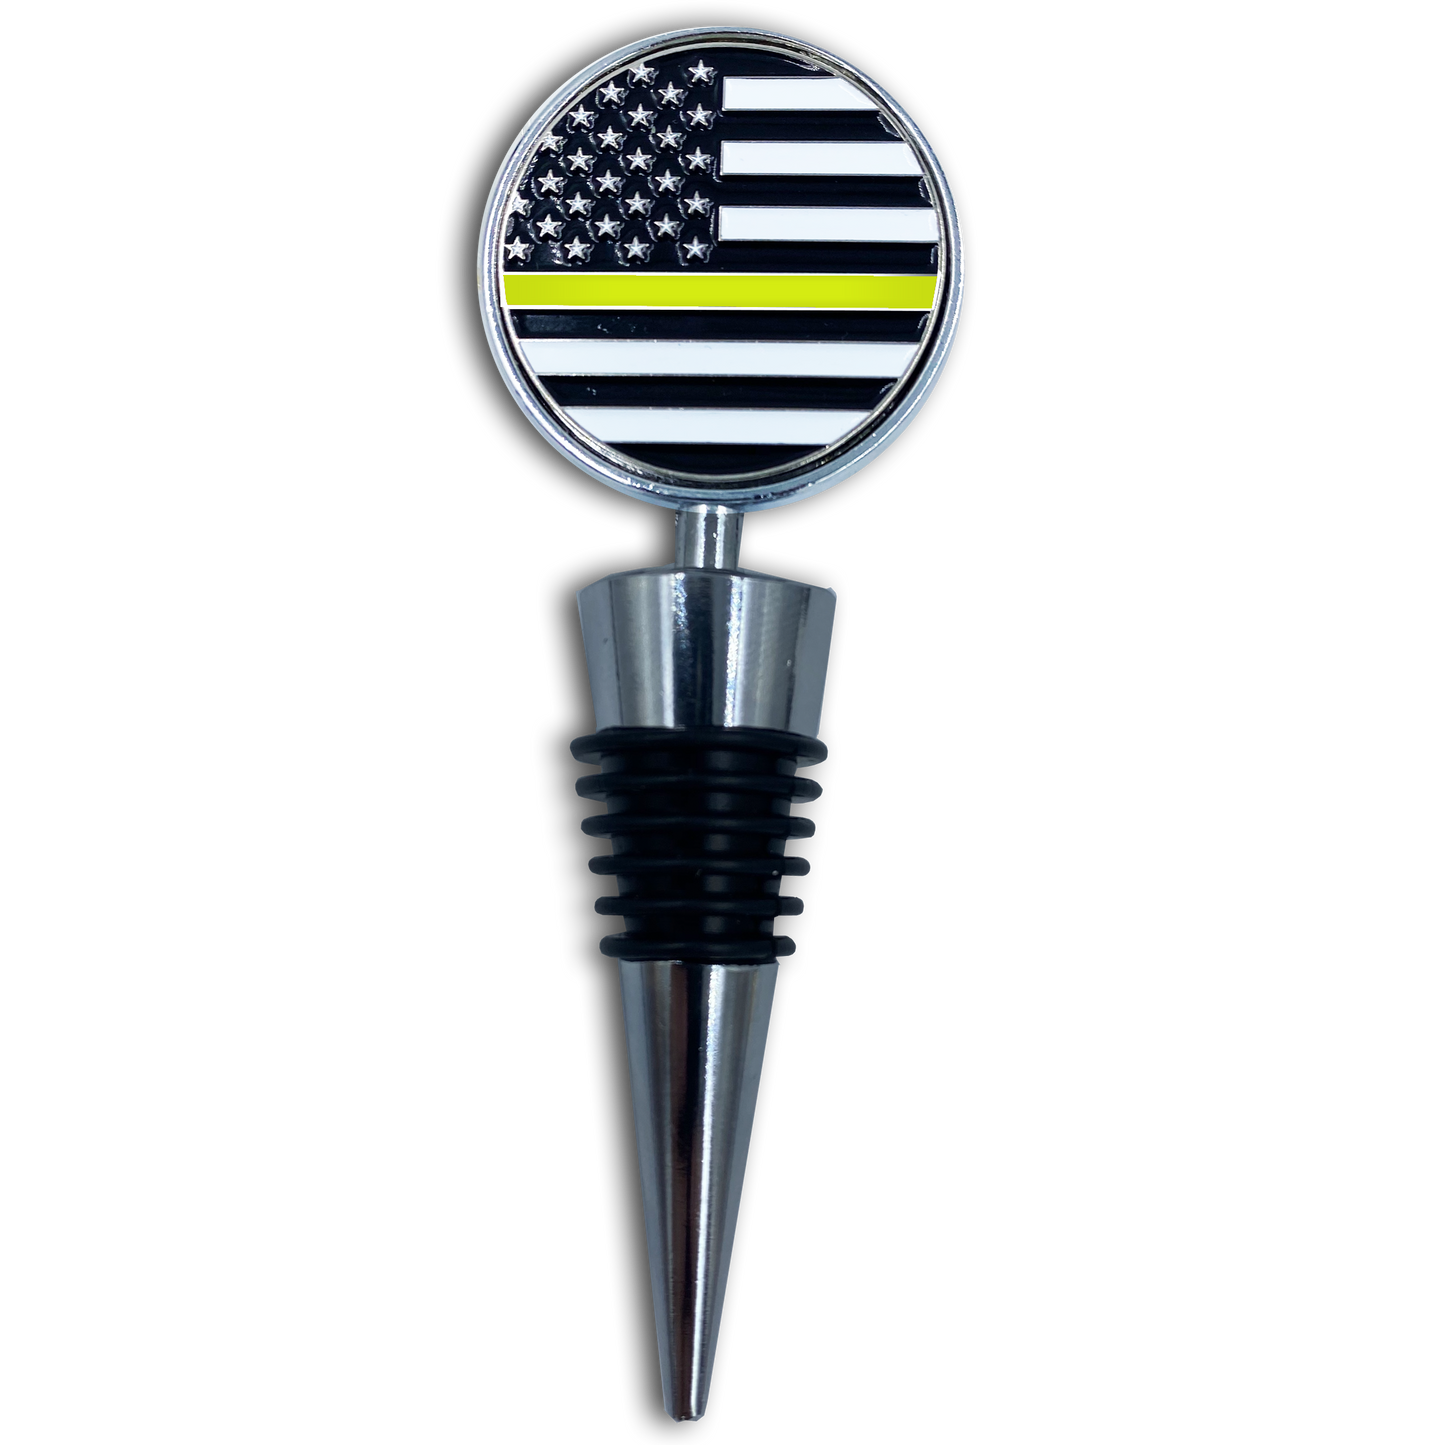 BL15-023 Thin Gold Yellow Line 911 Emergency Dispatcher American Flag Wine Bottle Stopper Challenge Coin